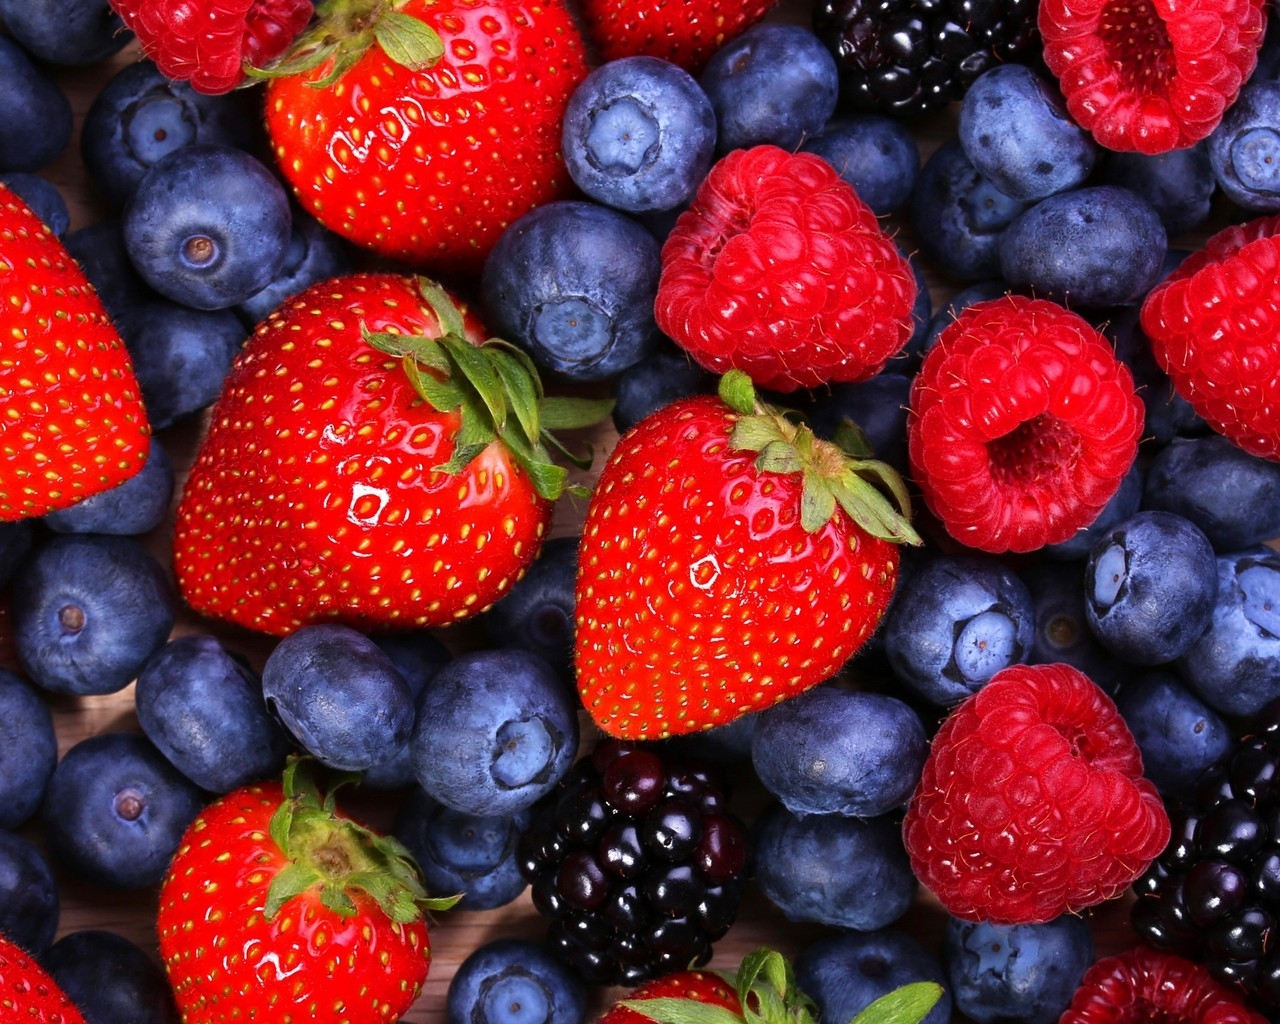 Berries for 1280 x 1024 resolution